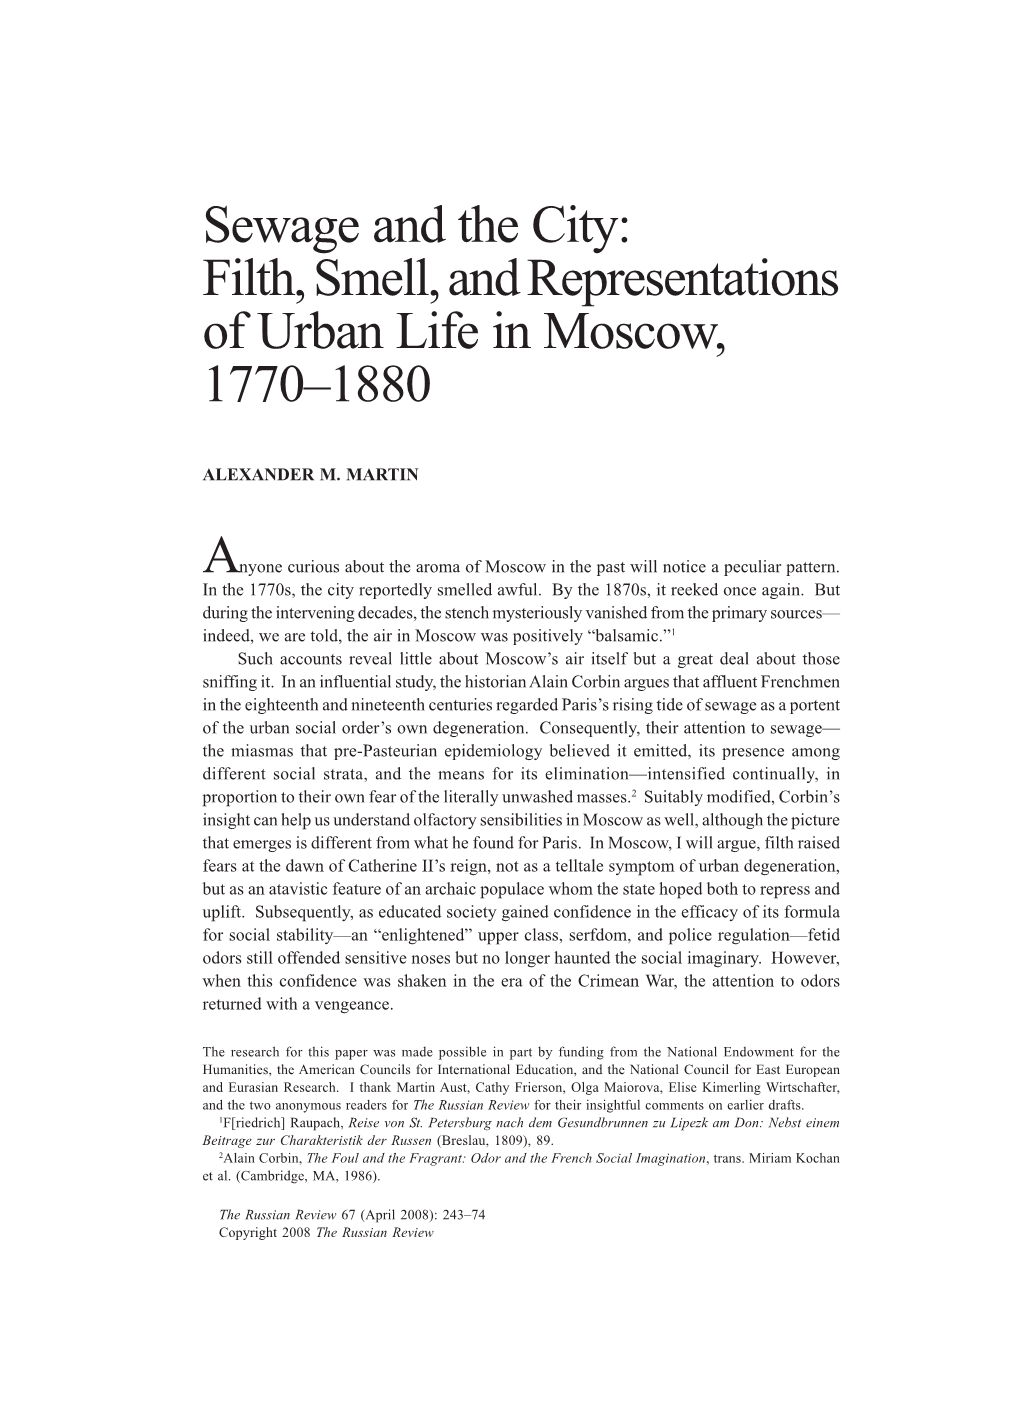 Filth, Smell, and Representations of Urban Life in Moscow, 1770–1880